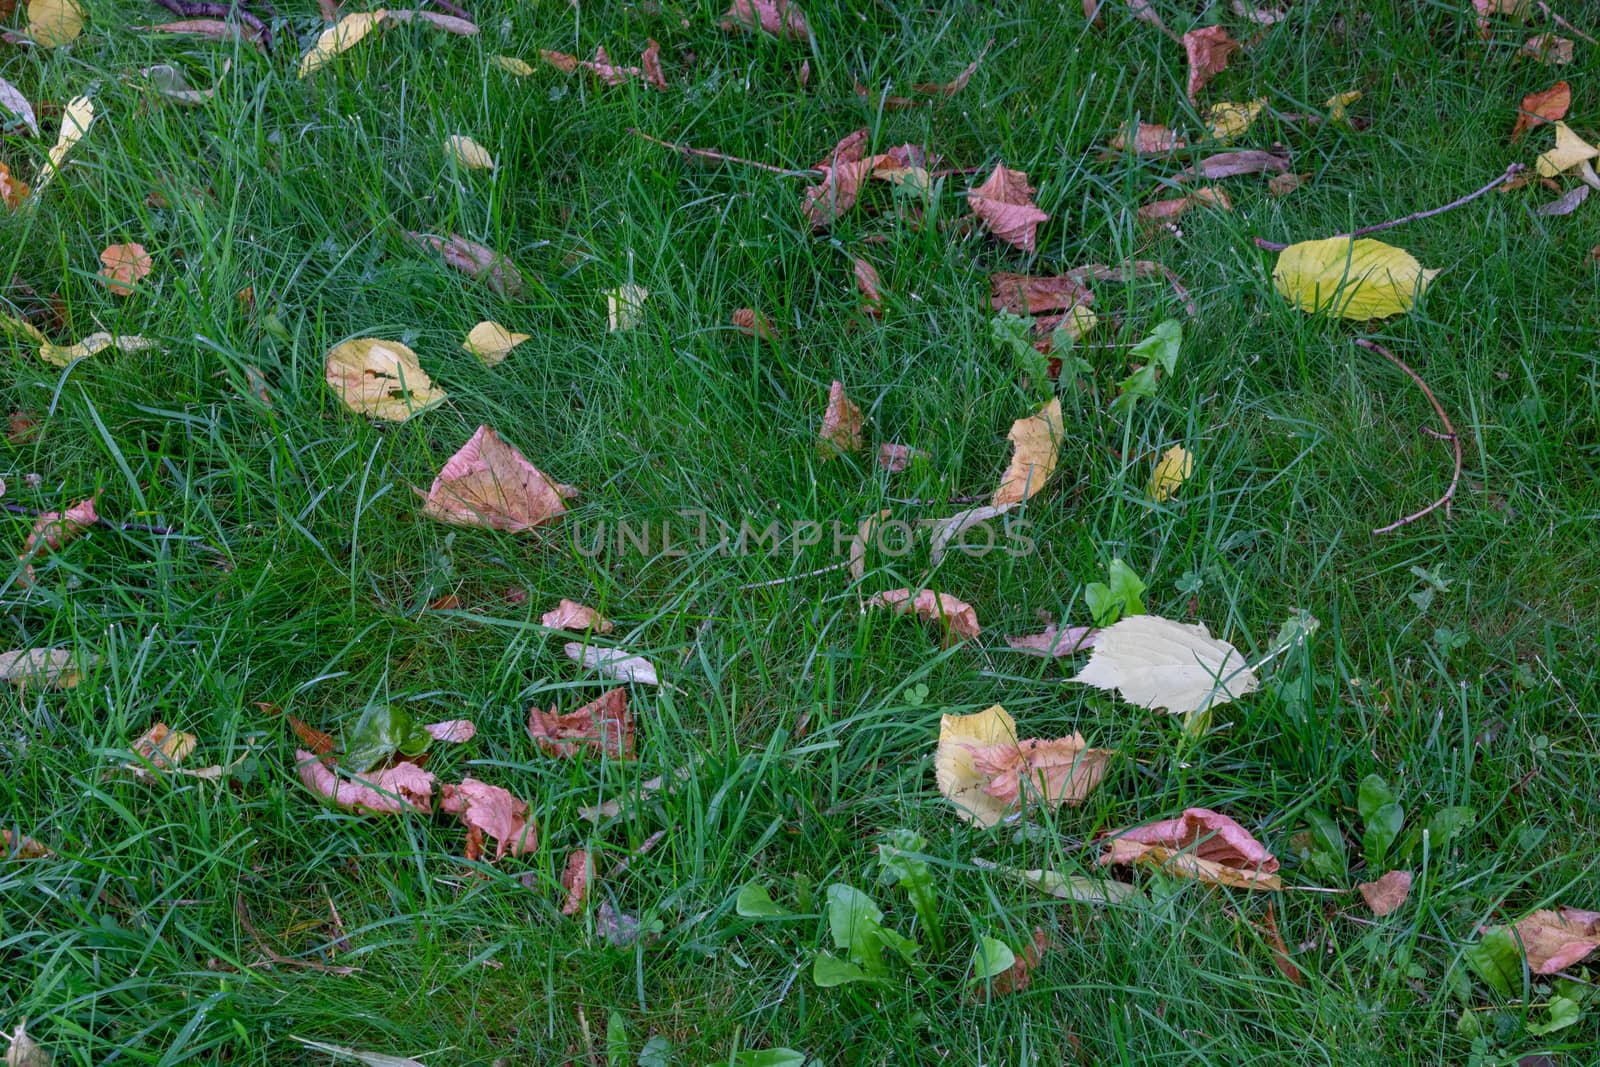 Fallen maple leaves on grass field. Autumn concept of fallen leaves on a green grass lawn. Dry leaves contrast with green grass. by lapushka62